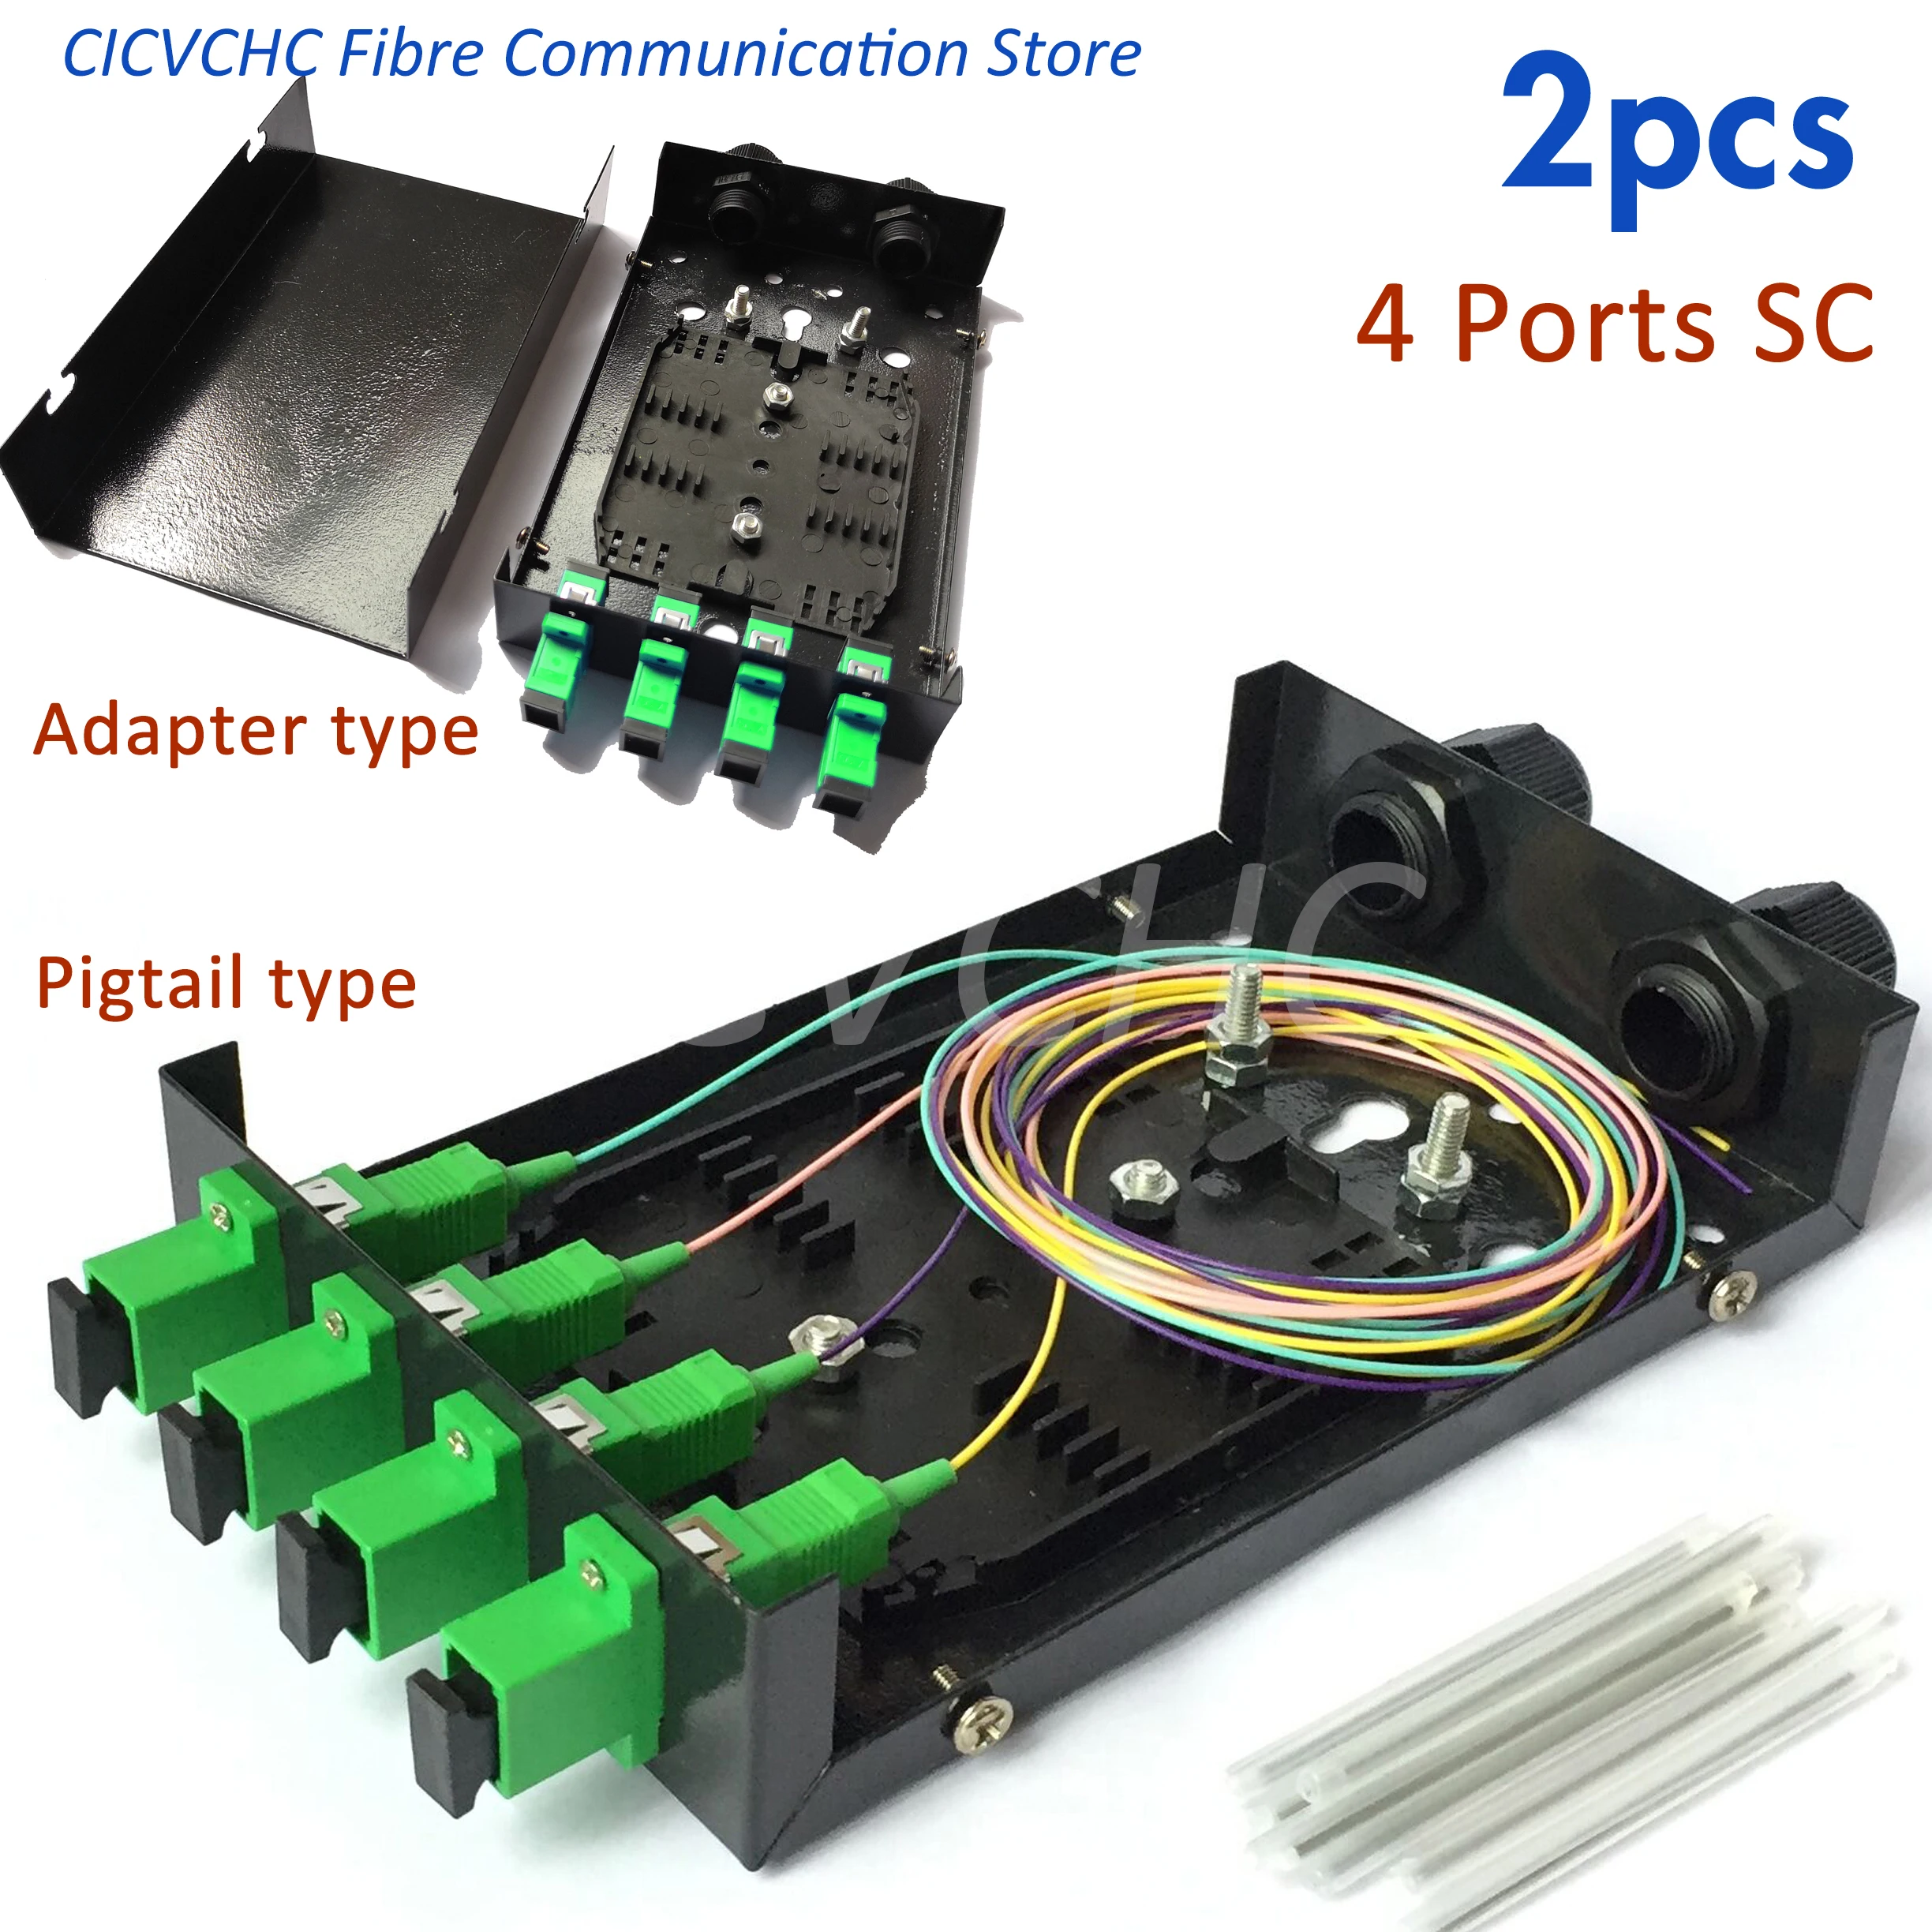 2pcs Fiber Terminal Box with 4 Port SC Adapter or pigtail and two Cable Gland for 3.5 to 8.5mm cable 2pcs uhf vhf fm tv f cable 75 300 ohm balun antenna matching transformer adapter